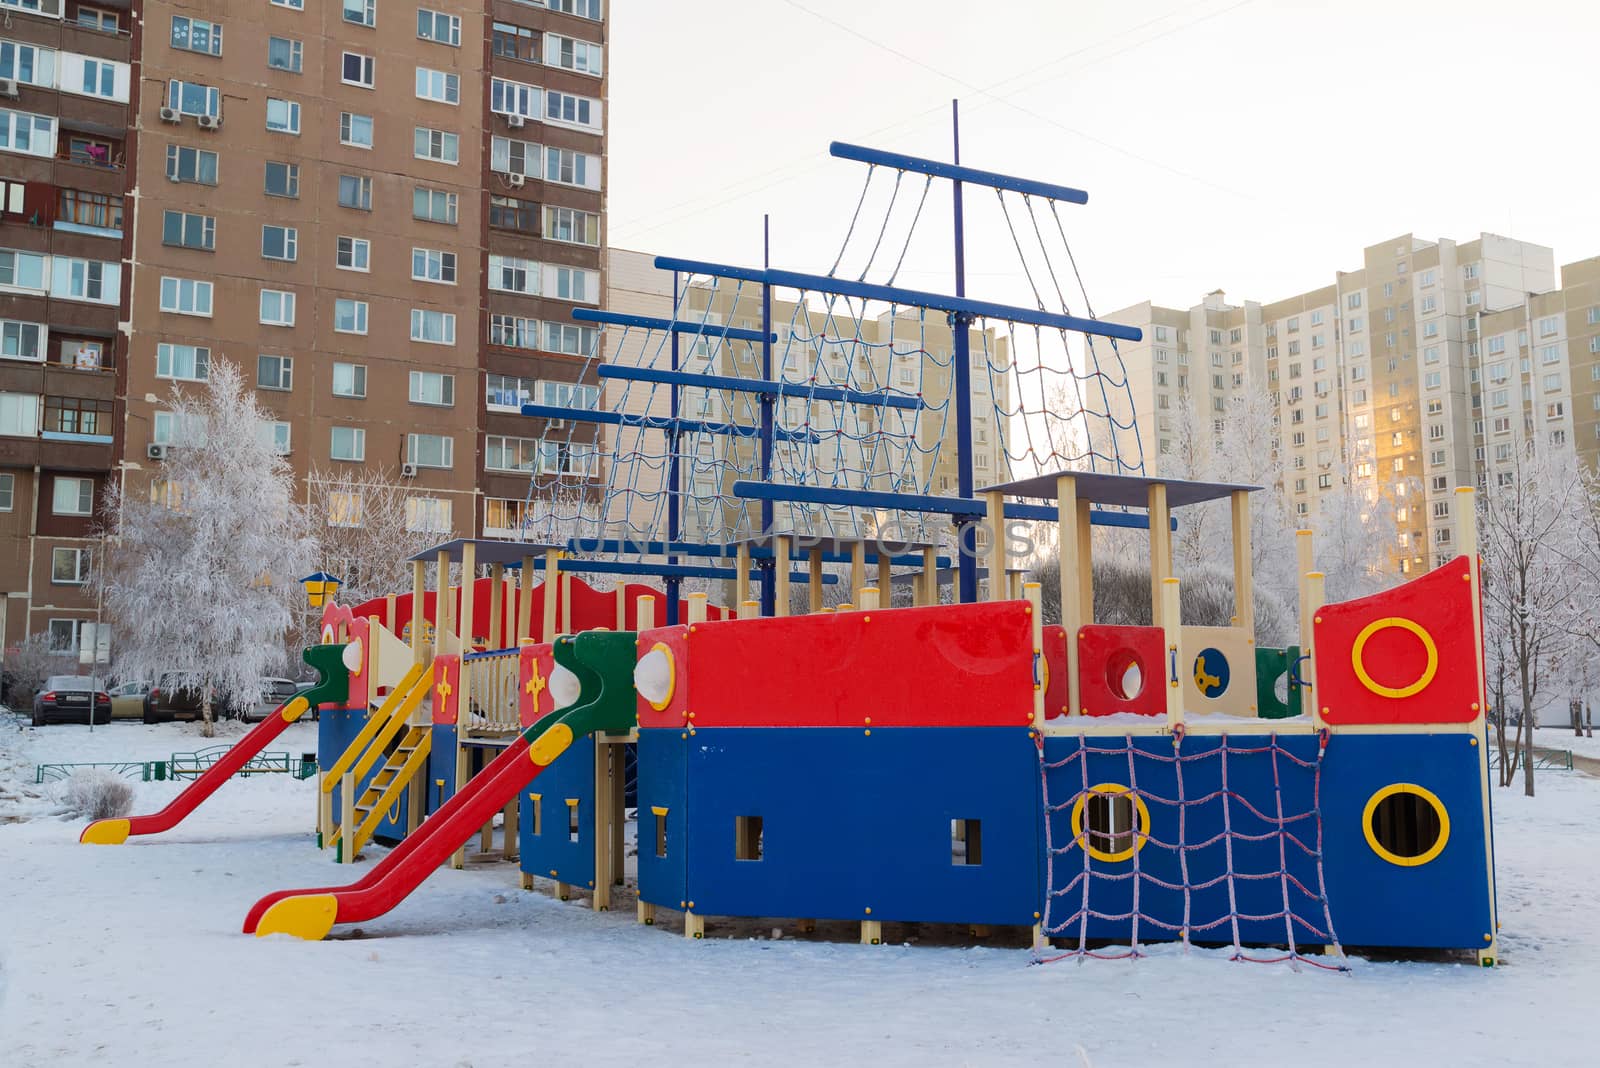 Playground structure outdoors in winter by olgavolodina